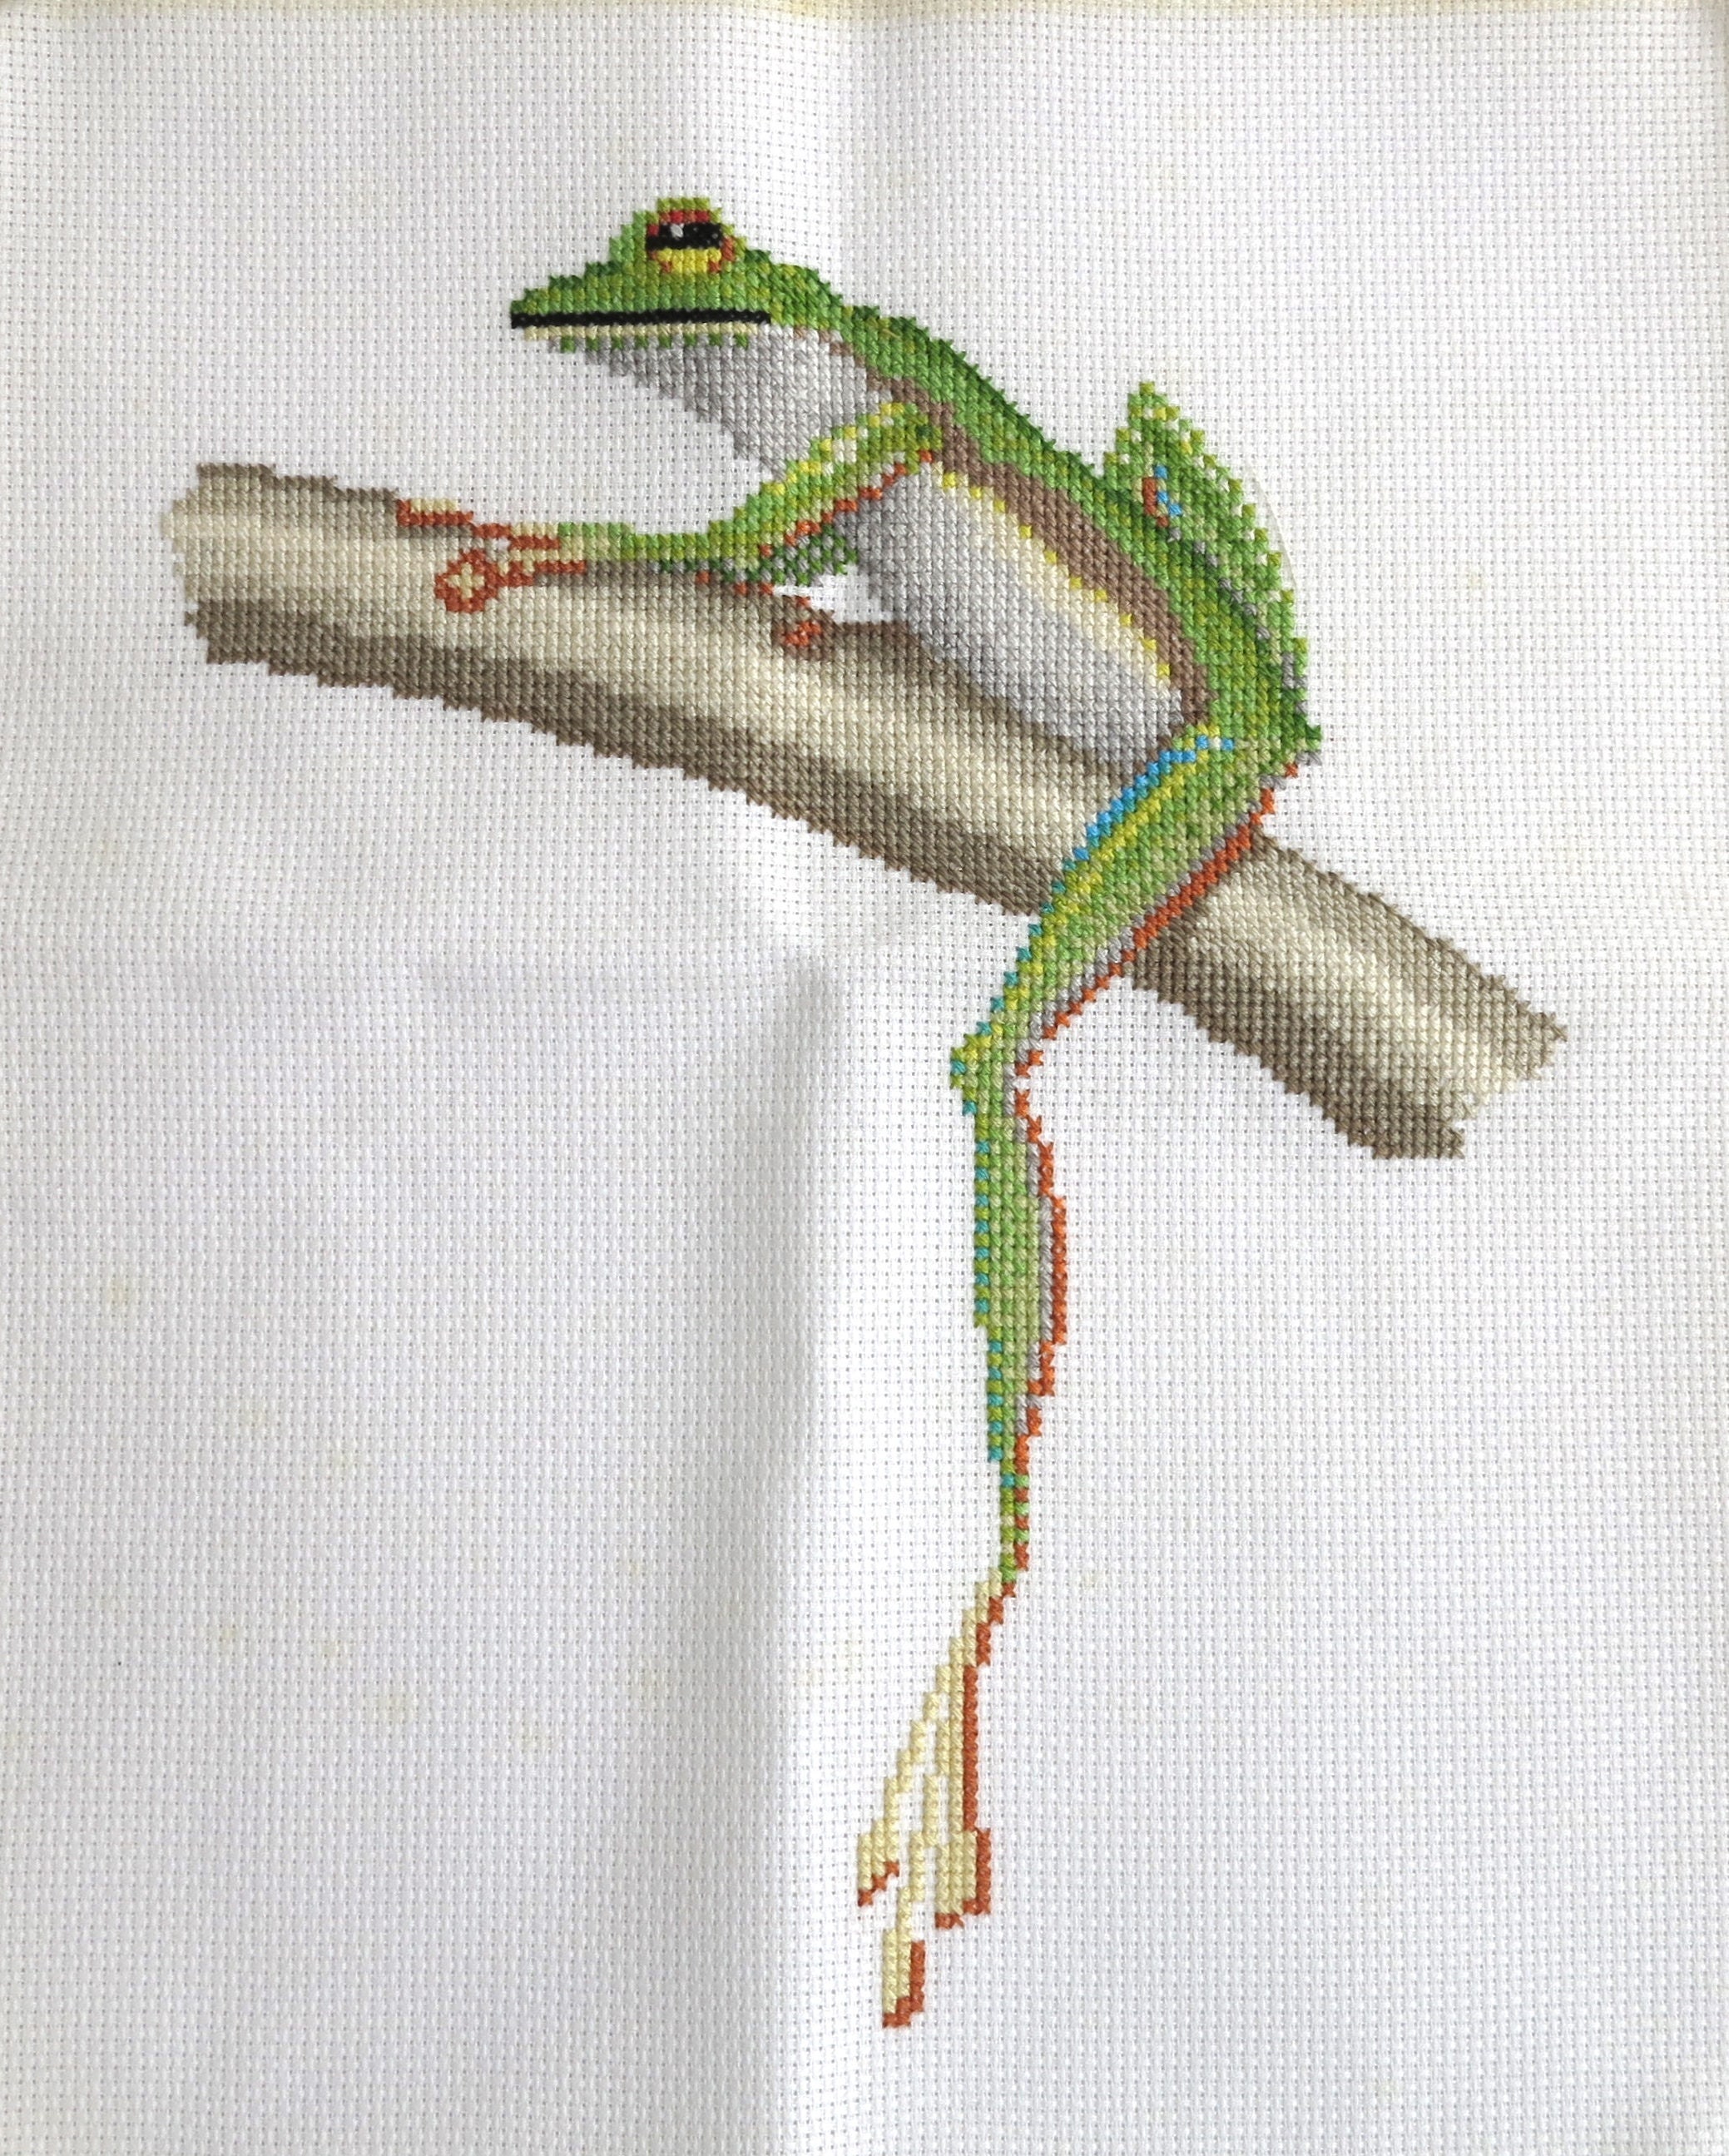 Download Embroidery of green frog sitting on a tree, continental ...